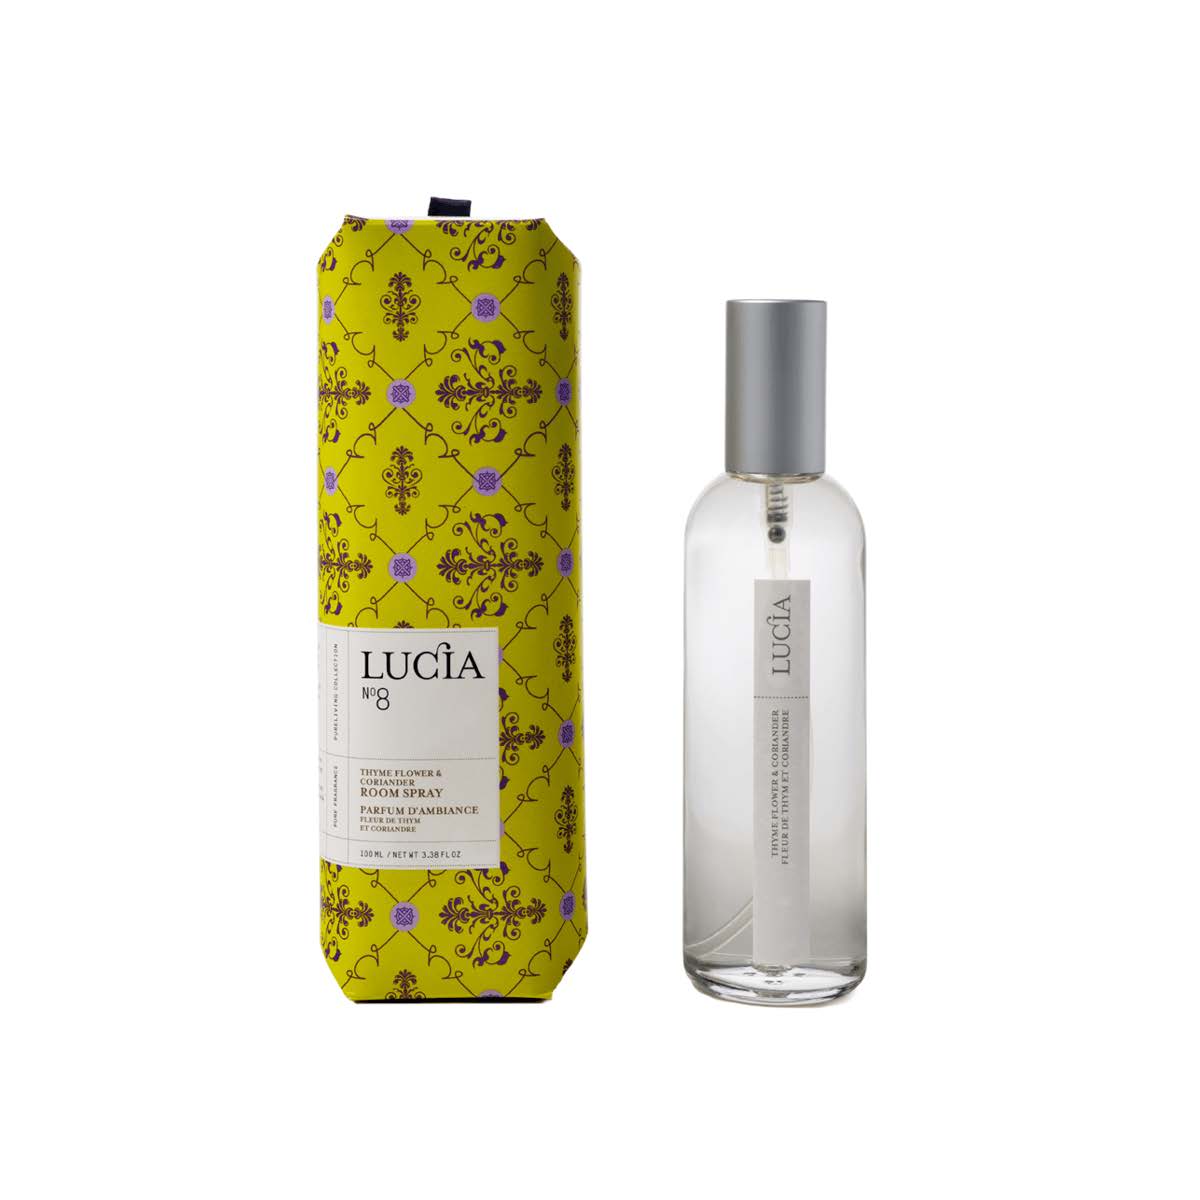 Lucia Room Spray No. 8 Thyme Flower and Coriander